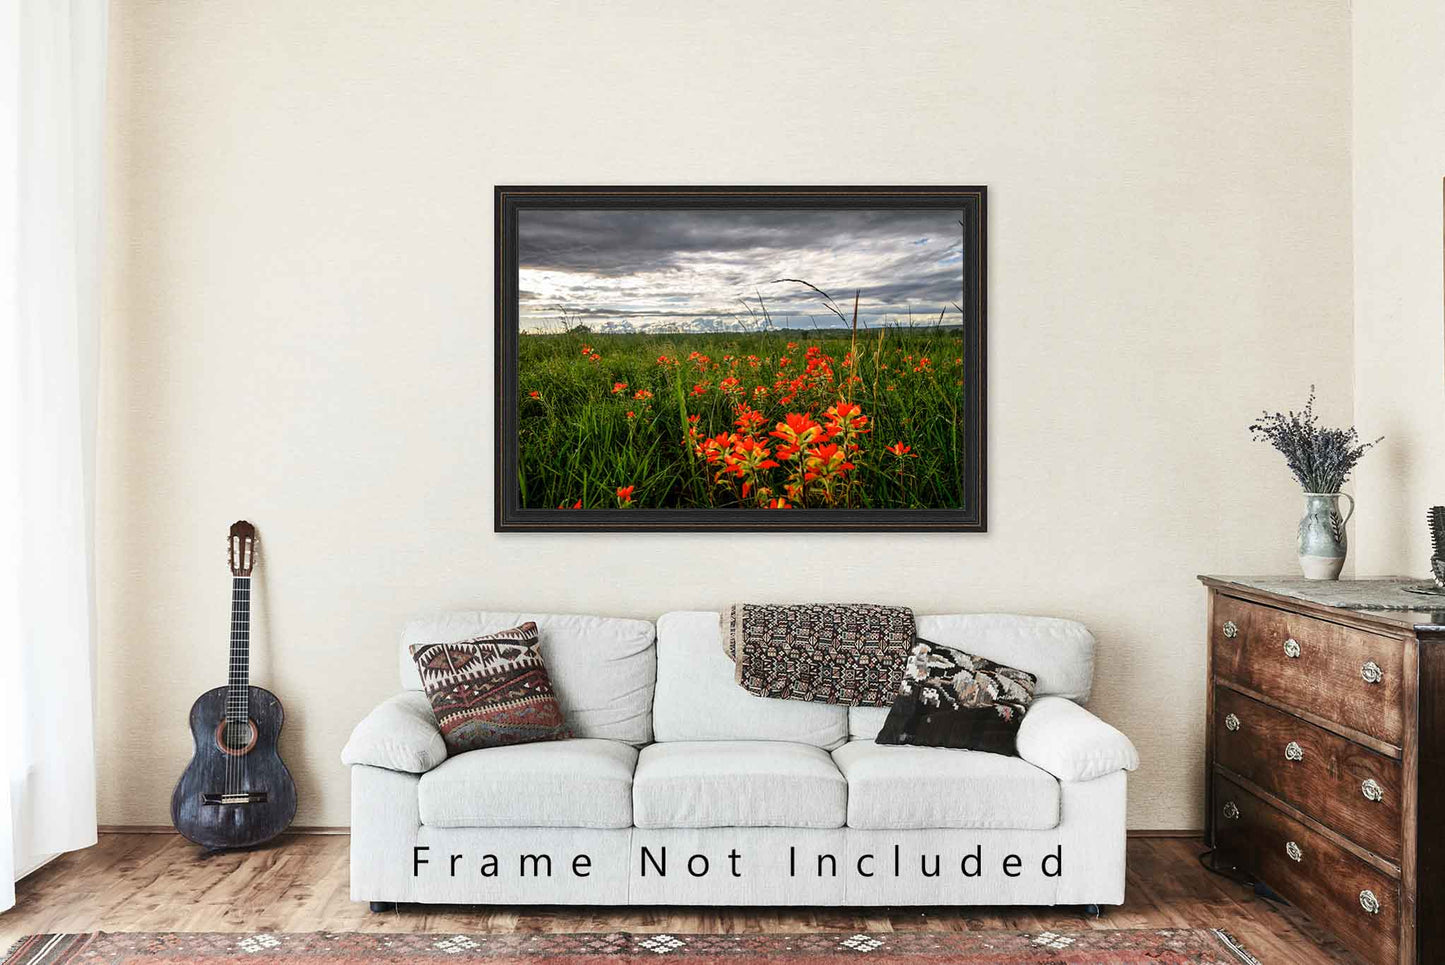 Indian Paintbrush Photography Print | Oklahoma Picture | Wildflower Wall Art | Flower Photo | Floral Decor | Not Framed